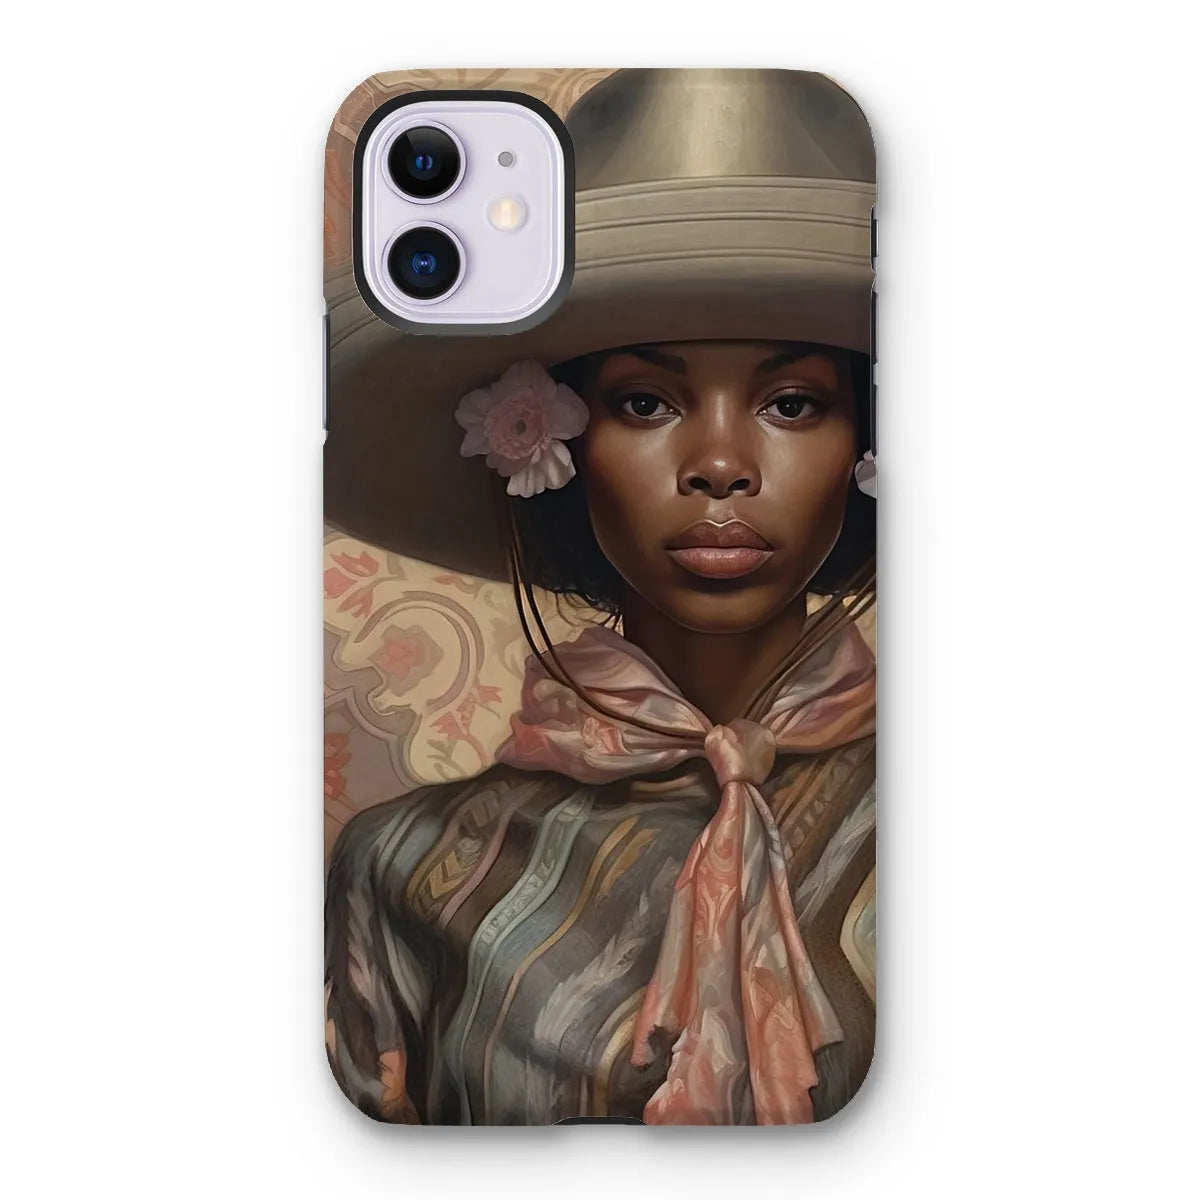 Sadie The Lesbian Cowgirl - Sapphic Art Phone Case - Iphone 11 / Matte - Mobile Phone Cases - Aesthetic Art